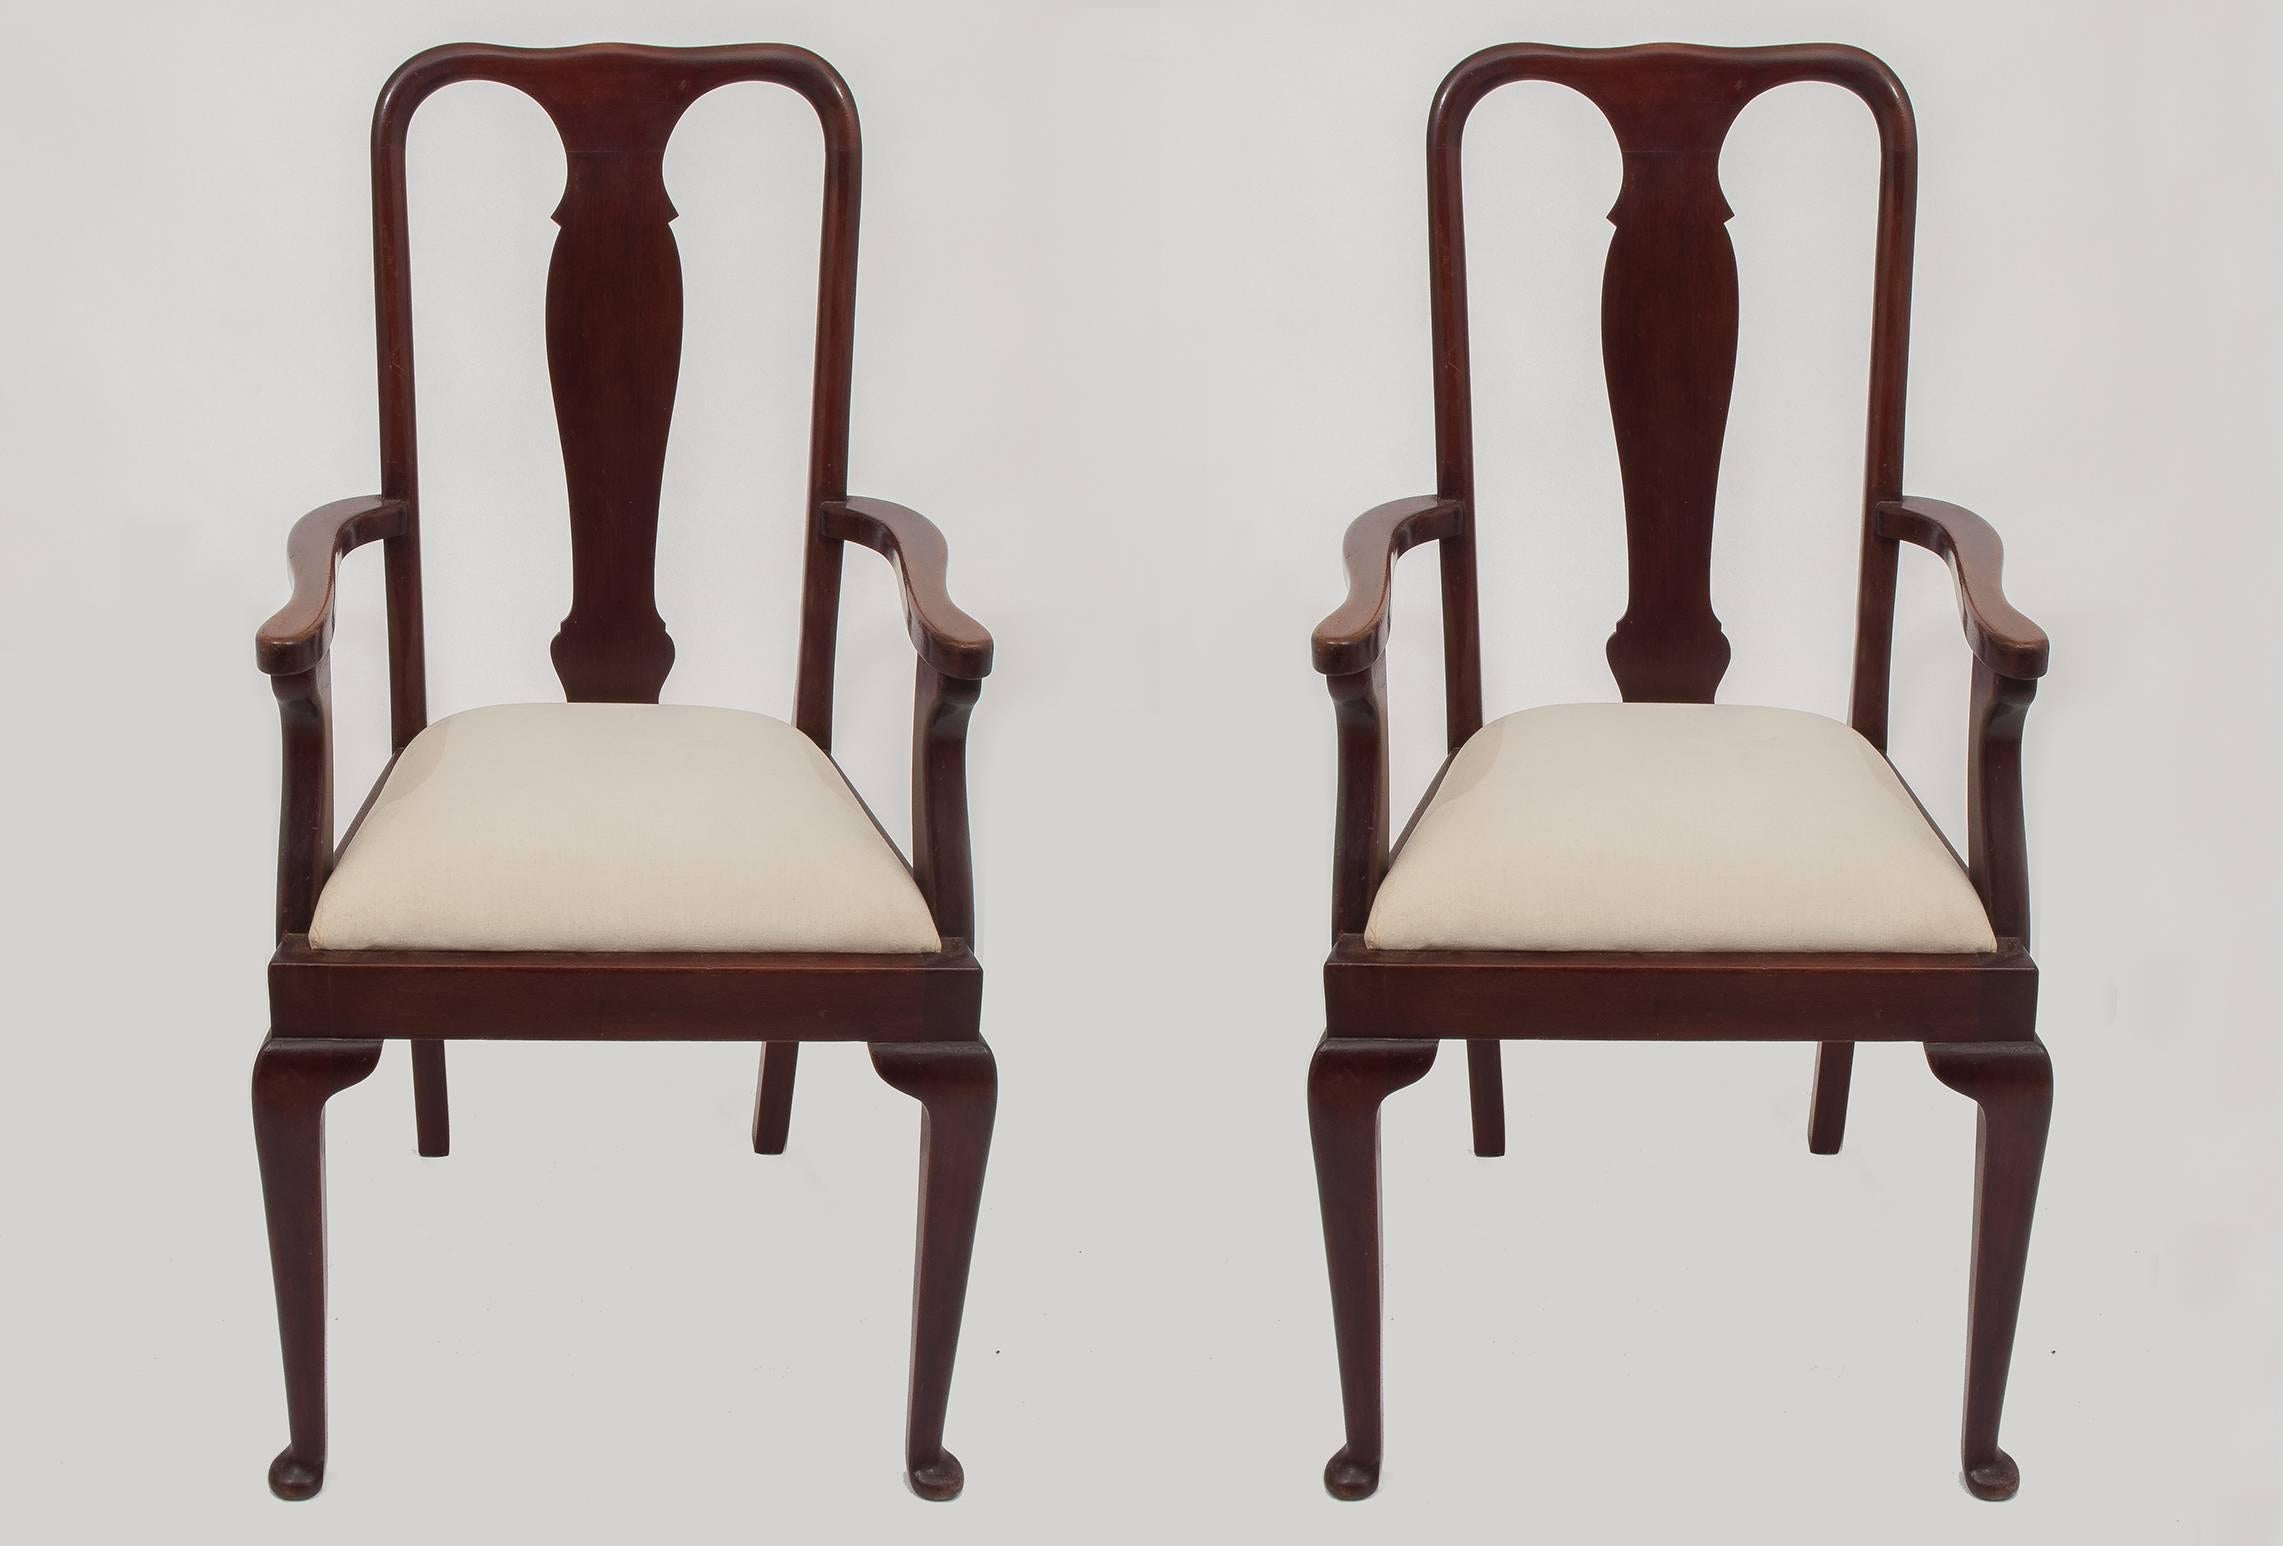 M/415, pair of Queen Anne mahogany high chairs, COMPLETE with six chairs LU137927942913 -
See price with the chairs: total was 8.400 € for 8 pieces, now DISCOUNTED to 4.200 € for all set.